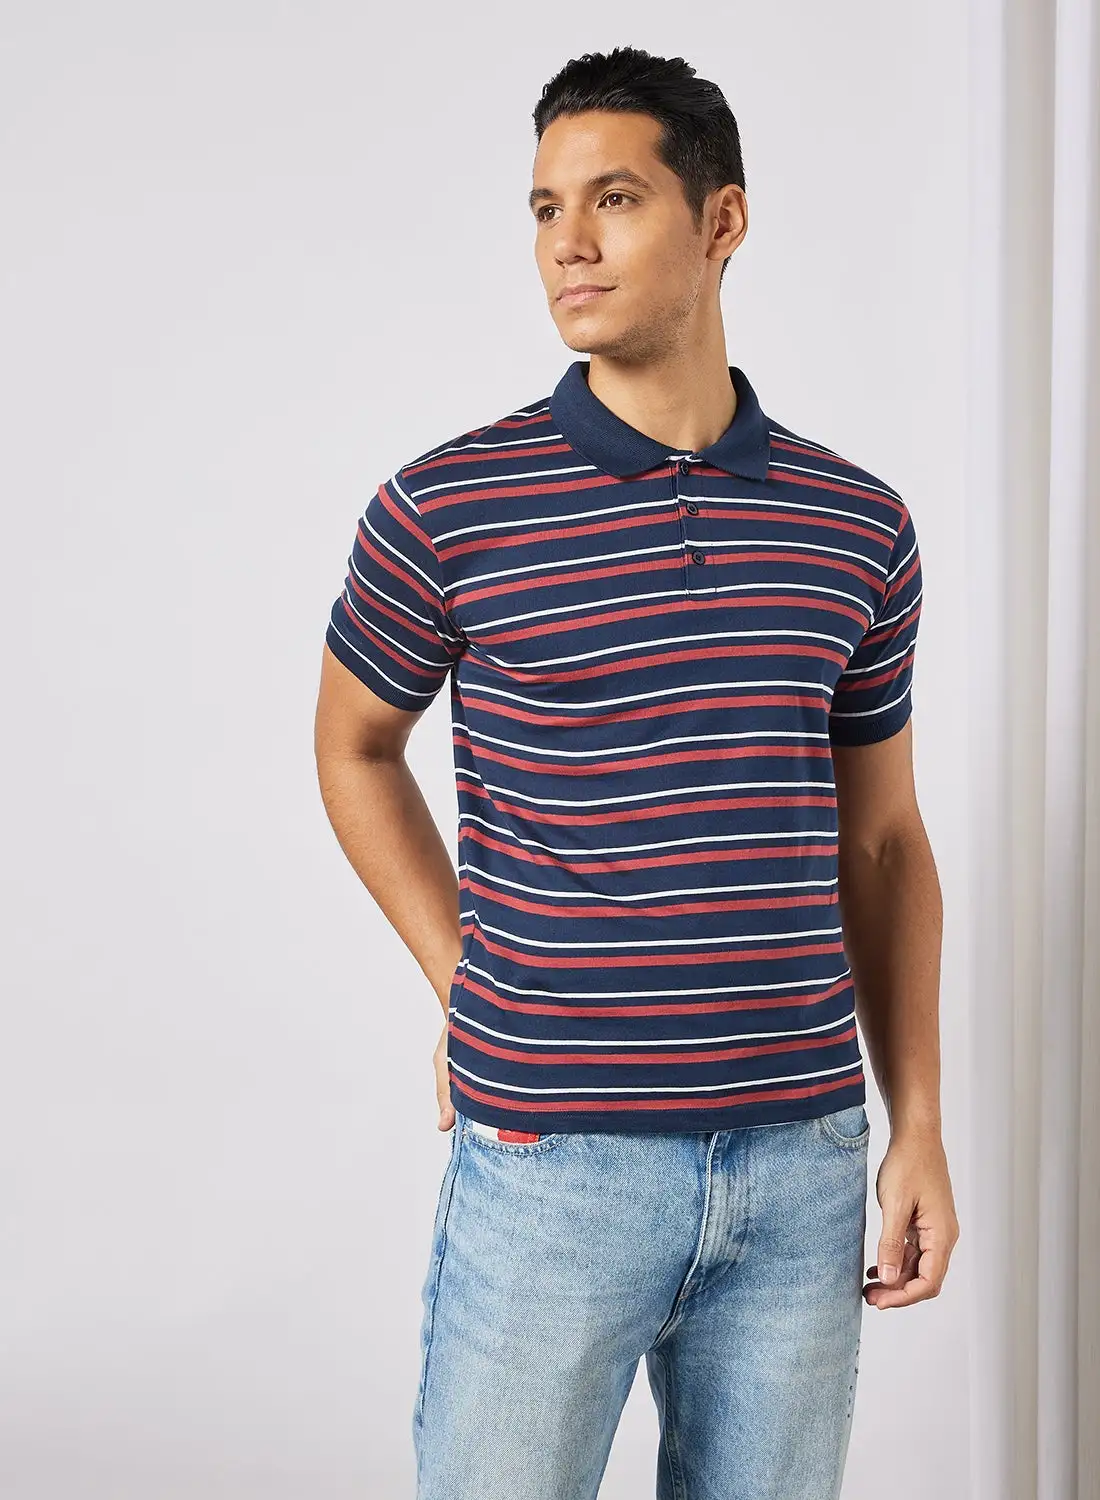 Noon East Men's Basic Casual Polo Printed Cotton T-Shirt in Regular Fit Half Sleeves Navy